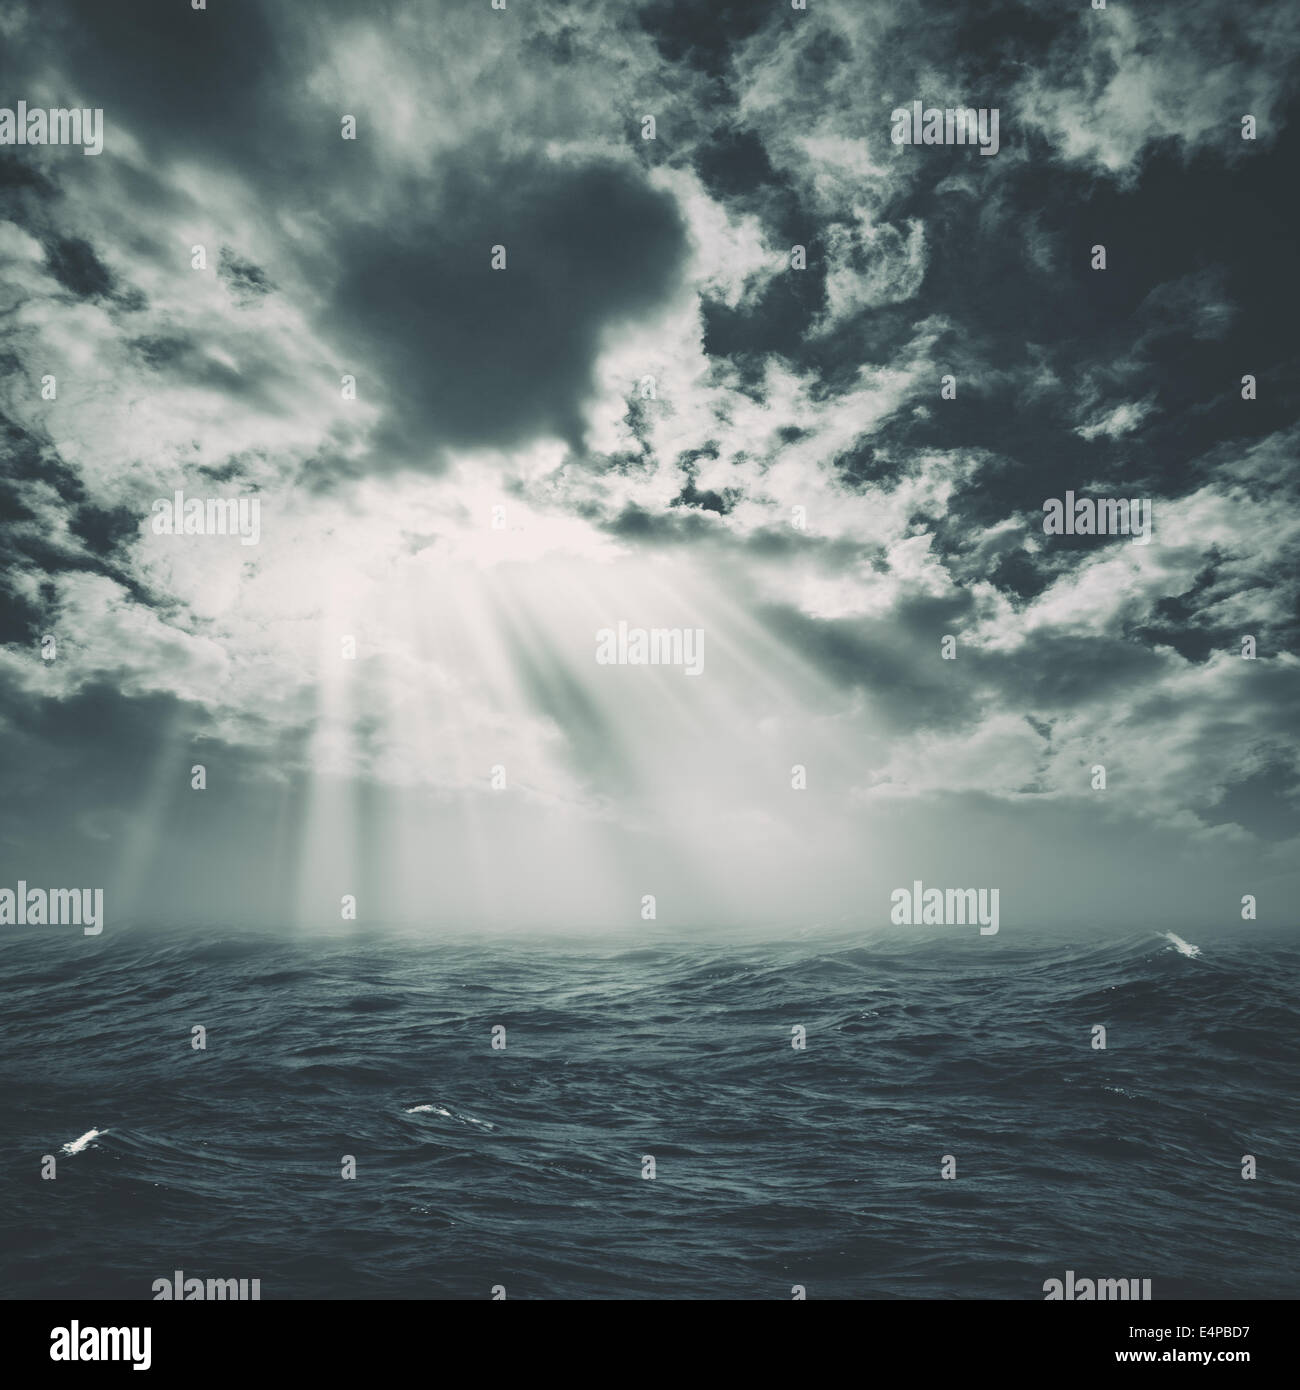 wild storm on the sea with sun beam from the cloudy skies Stock Photo